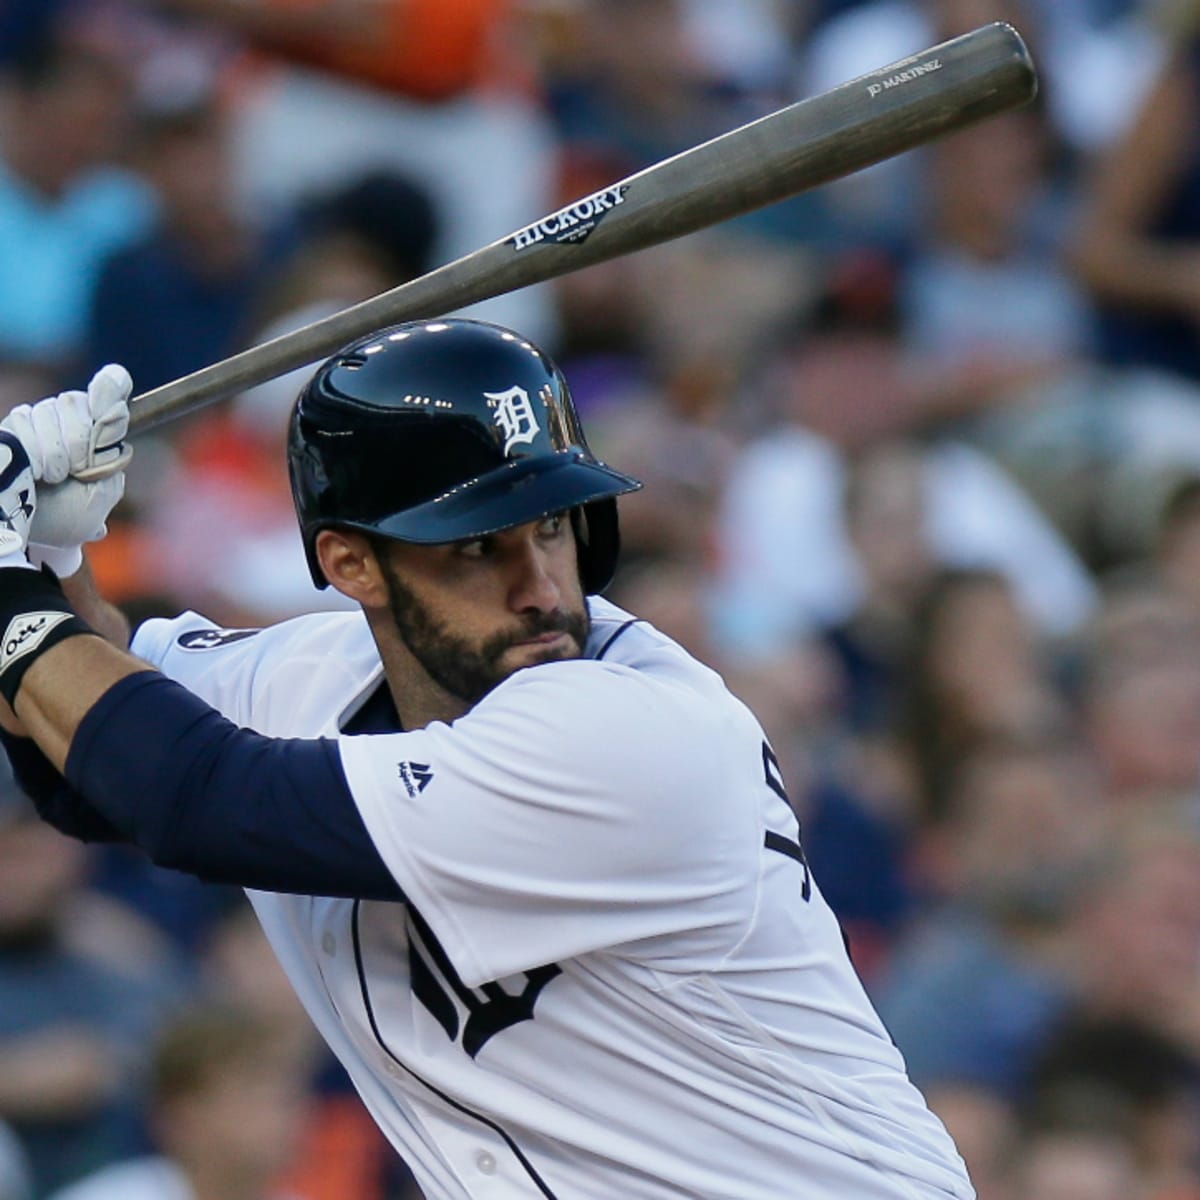 Tigers to give out J.D. Martinez bobblehead, who they traded to